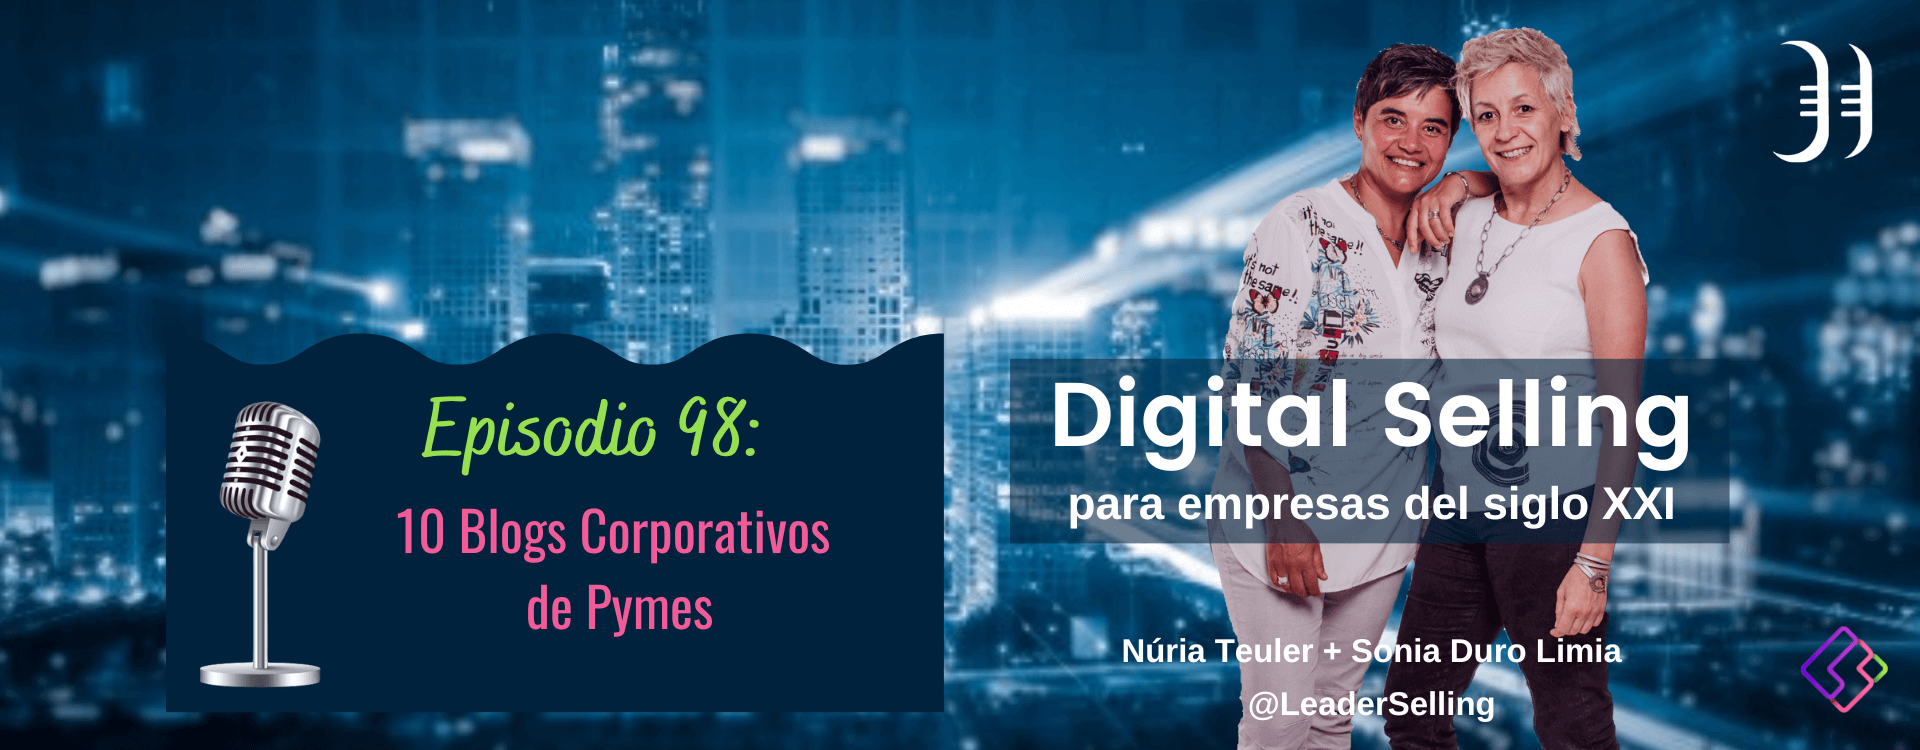 Leader-Selling-episodio-98-blogs-corporativos-pymes..